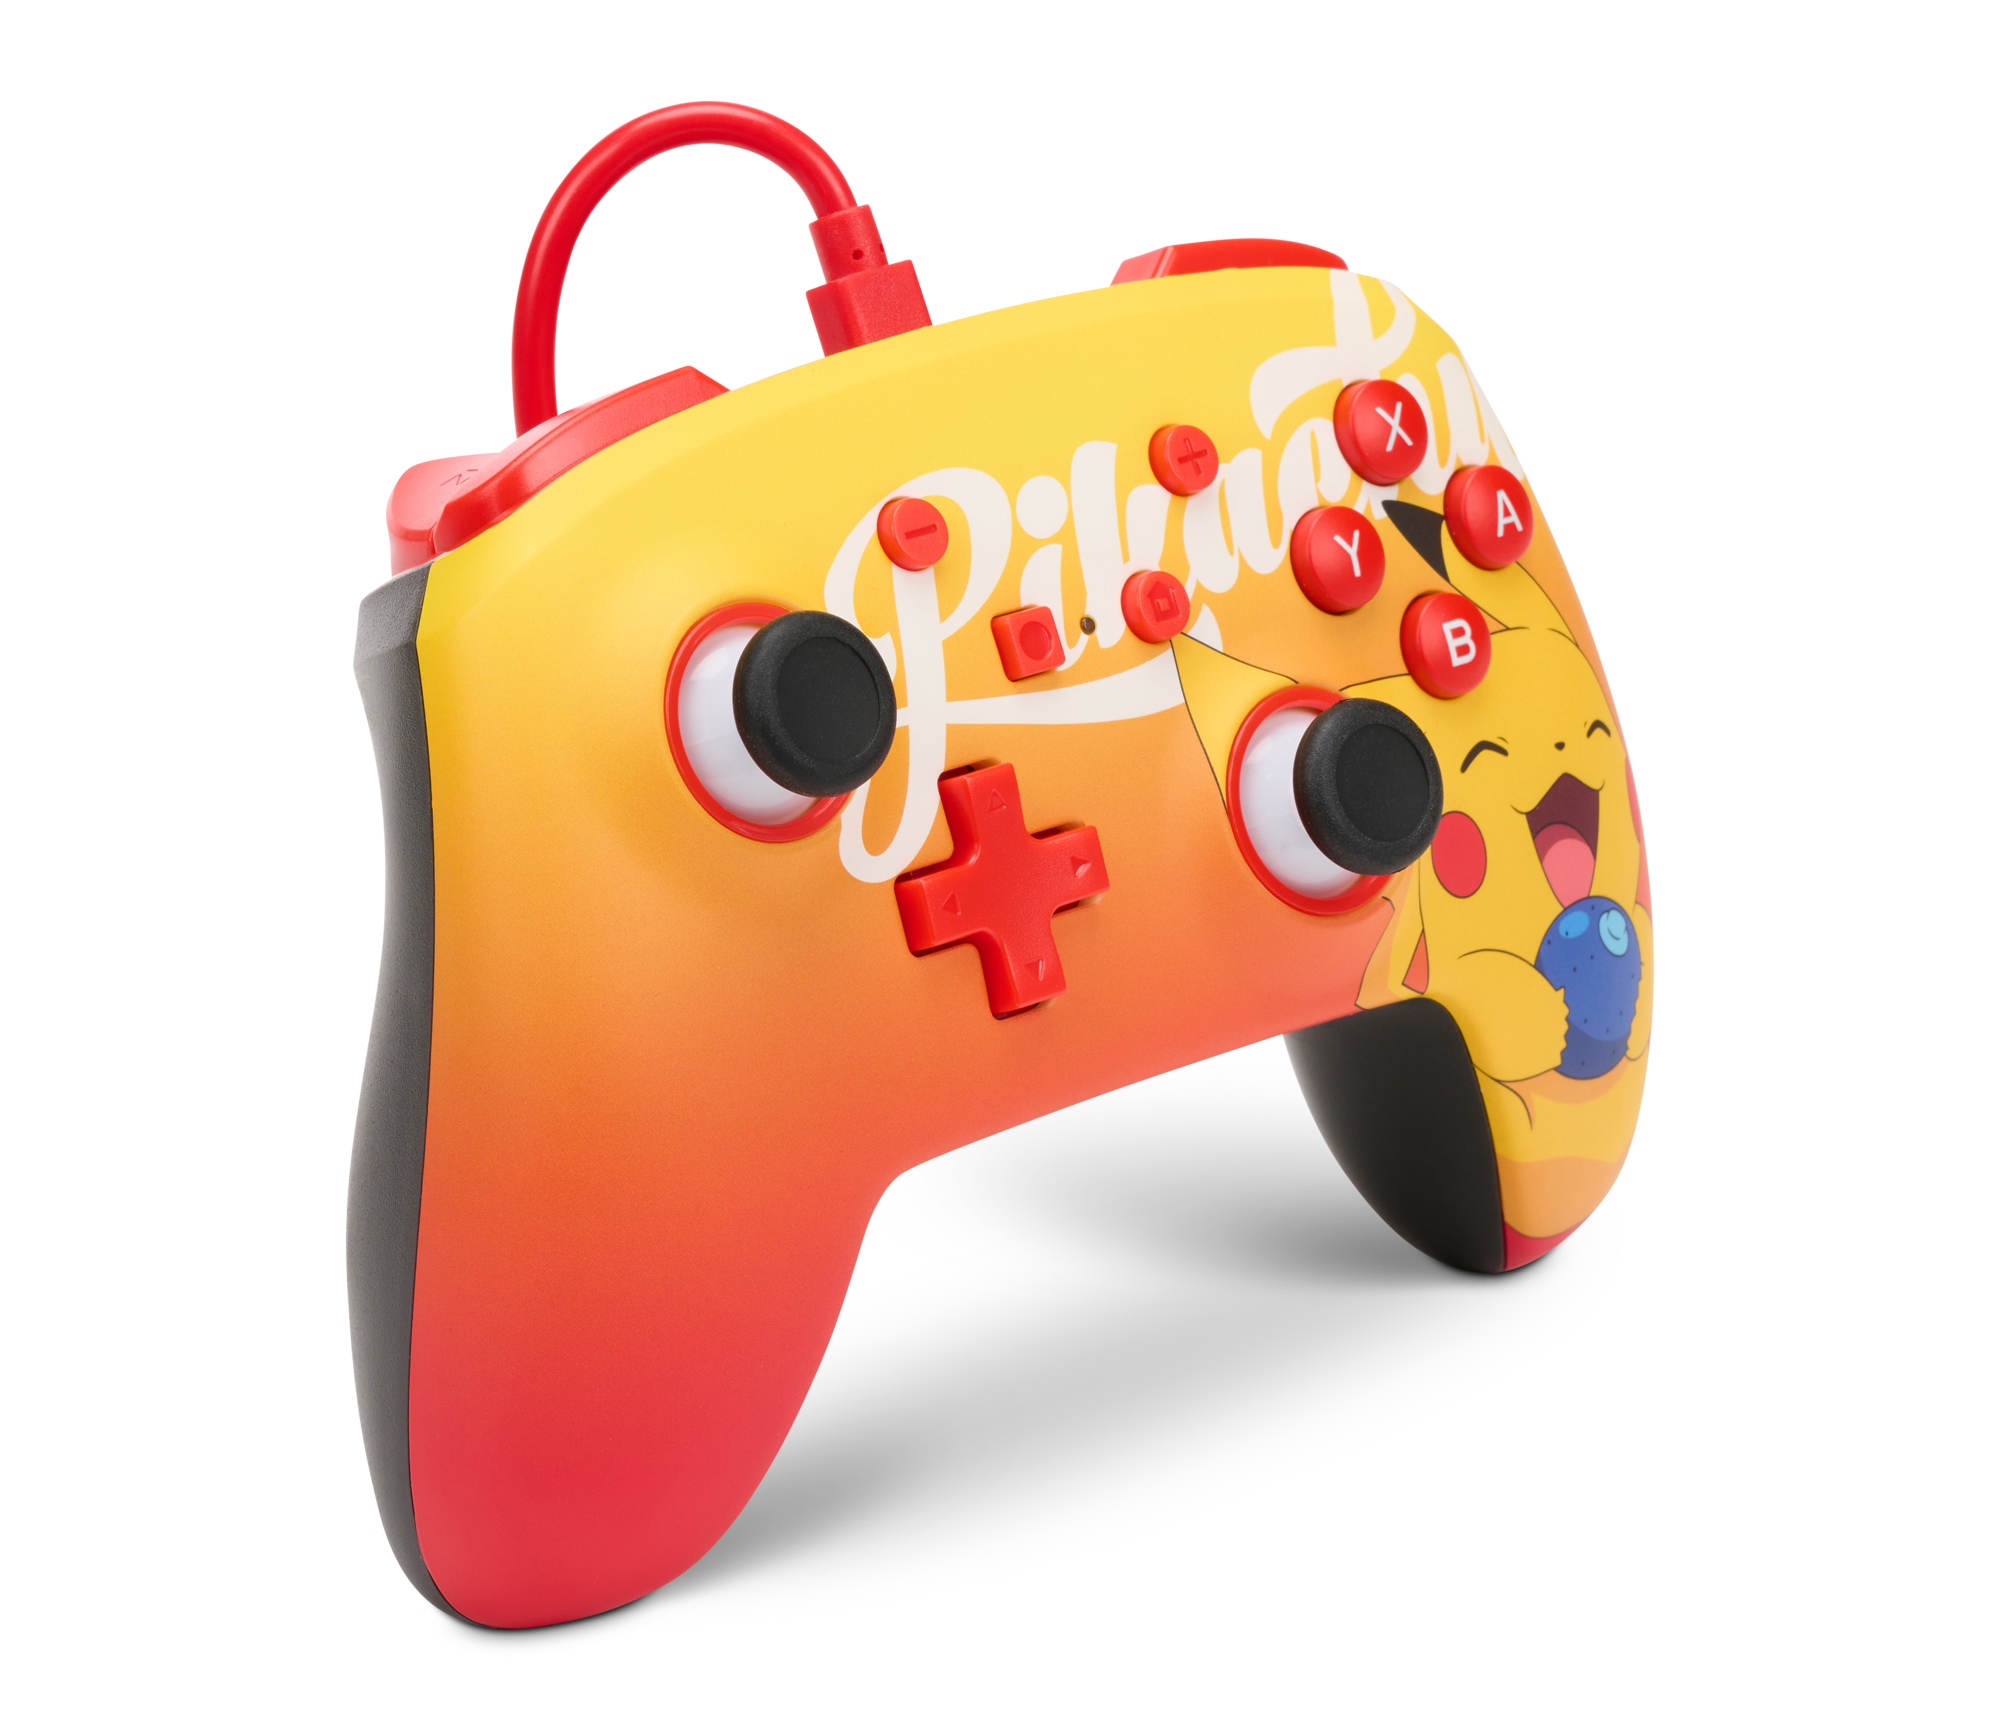 PowerA Enhanced Wired Controller for Nintendo Switch - Oran Berry Pikachu - image 2 of 9